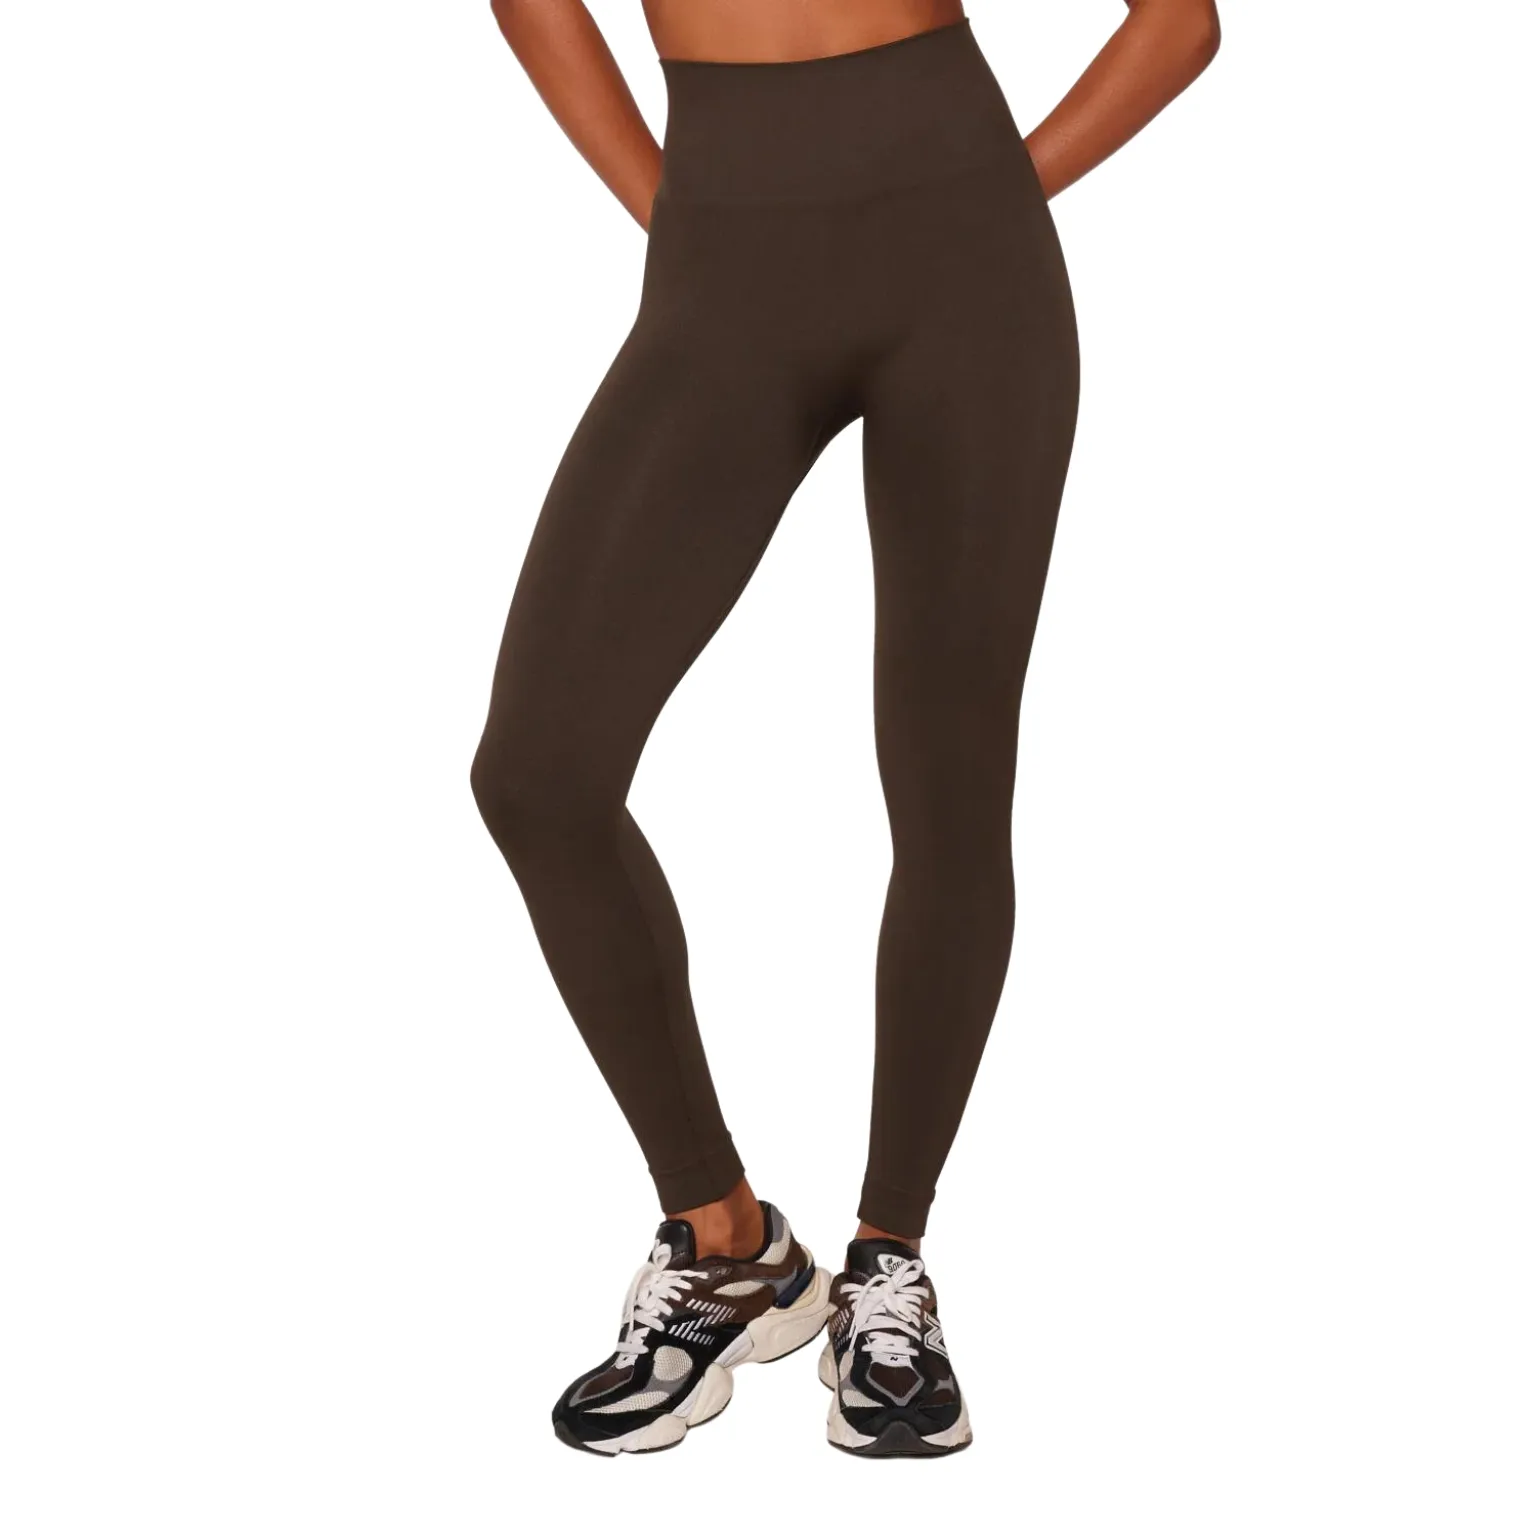 Active Leggings Manufacturing with superior quality